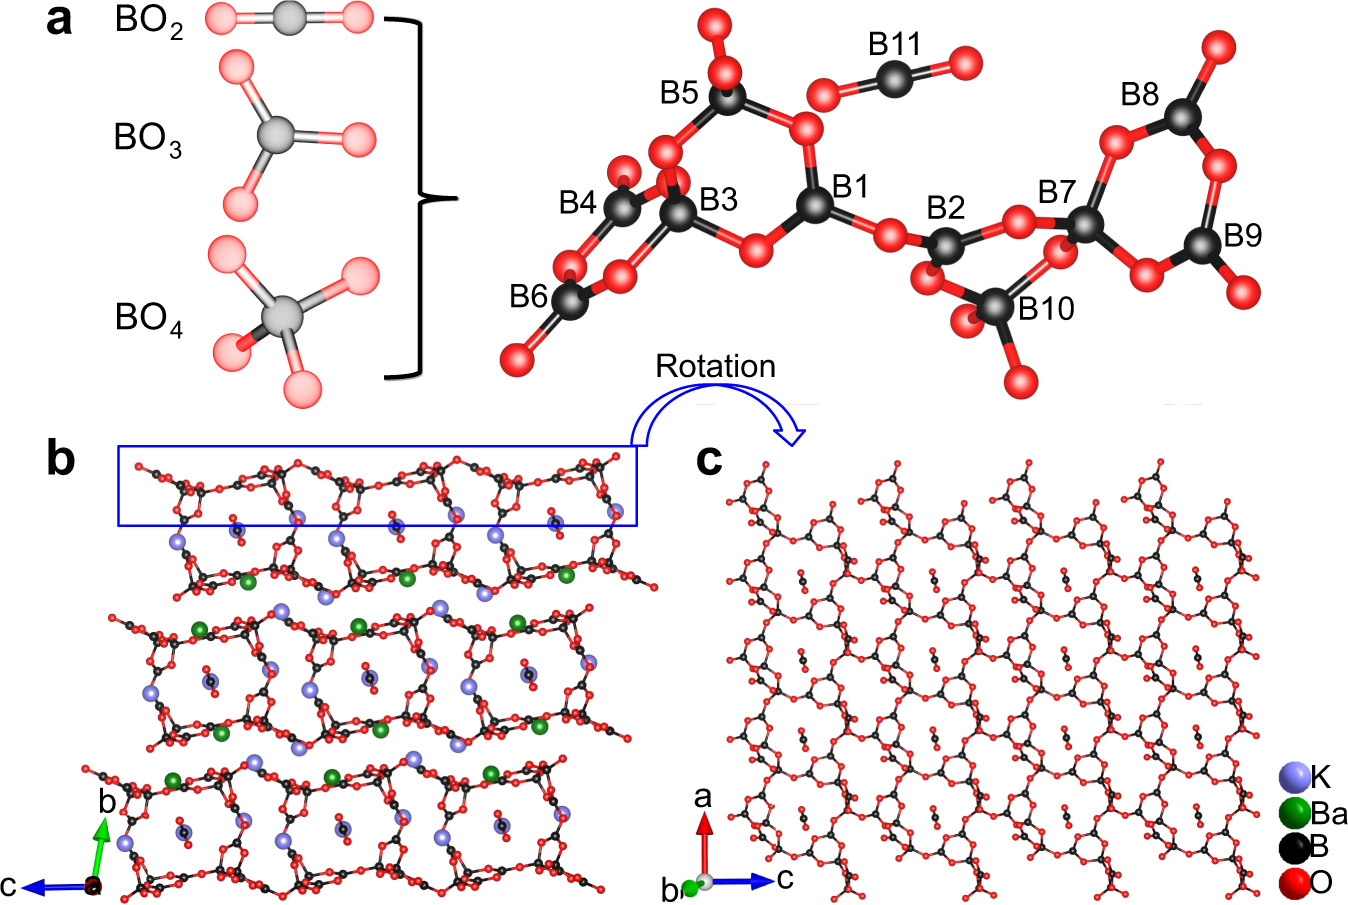 expanding the chemistry of borates with functional bo2 anions nature communications